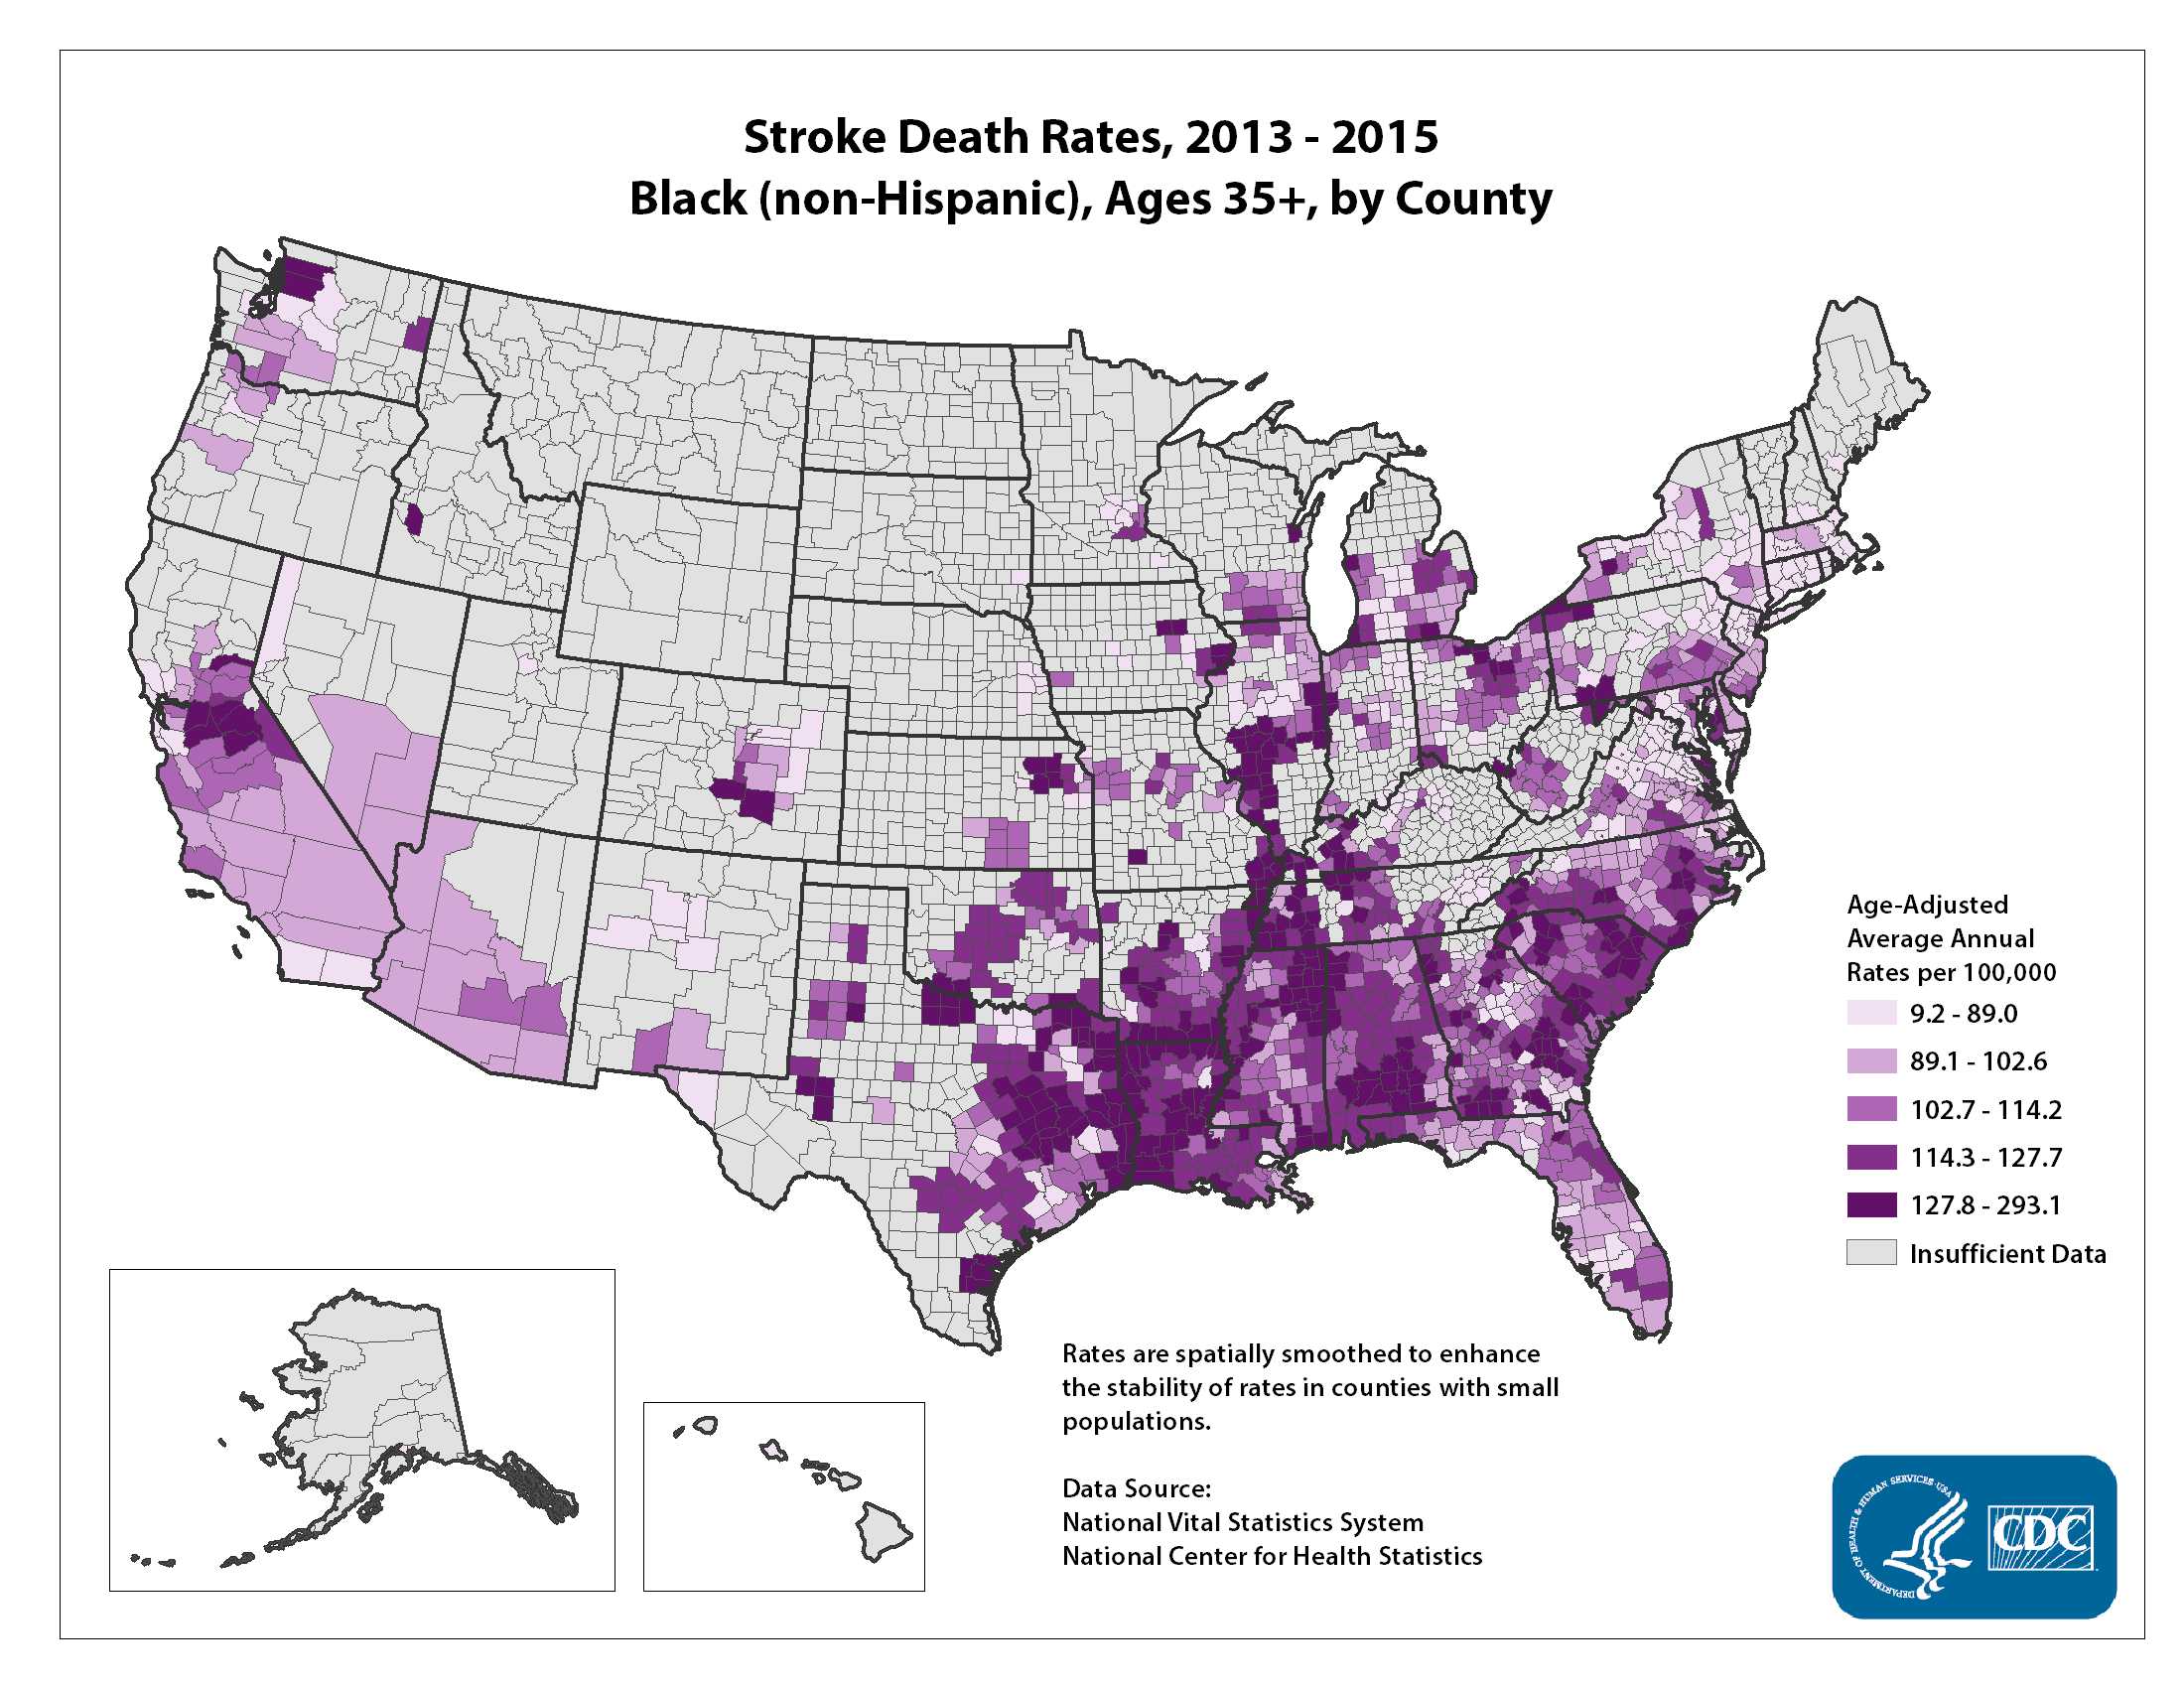 Stroke Death Rates for 2012 through 2014 for Blacks Aged 35 Years and Older by County. The map shows that concentrations of counties with the highest stroke death rates - meaning the top quintile - are located primarily in parts of Texas, Louisiana, and Illinois. Pockets of high-rate counties also are found in West Virginia, Georgia, South Carolina, Oklahoma and New York.